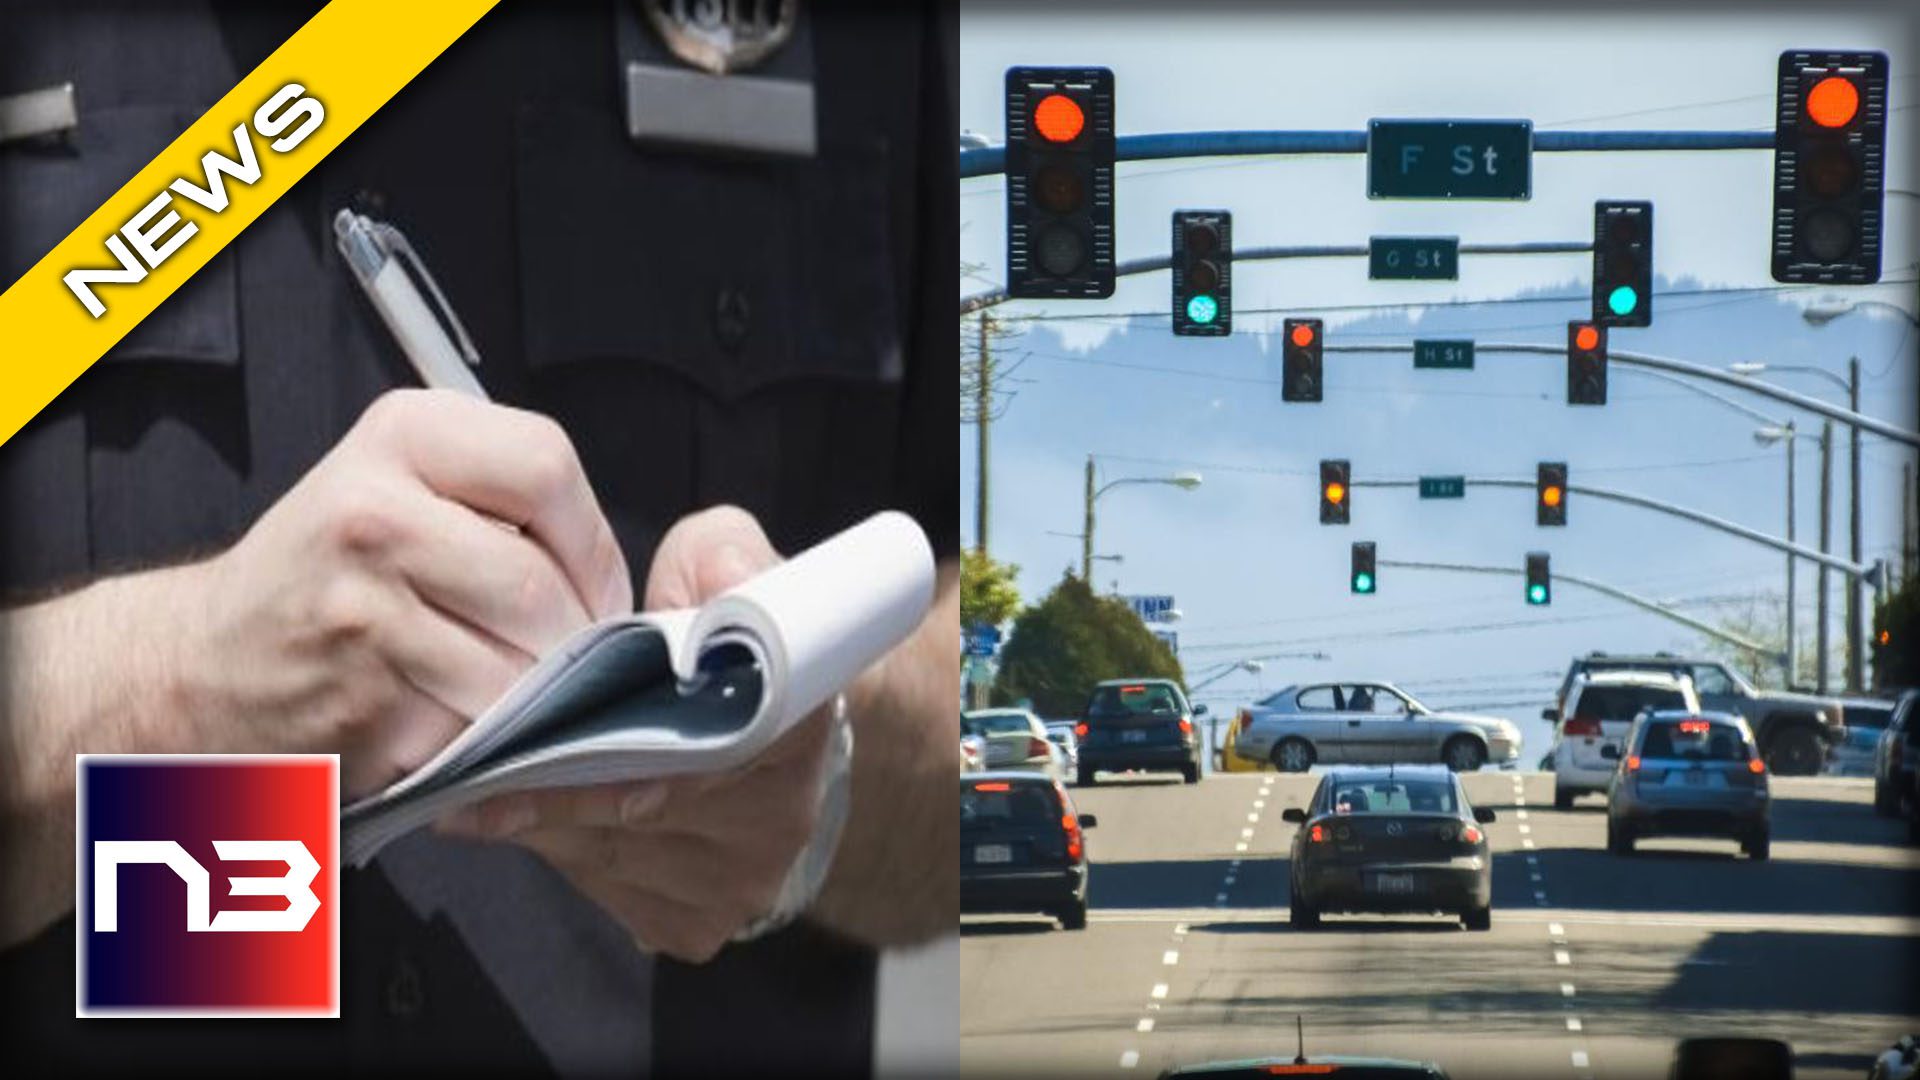 50 MILLION DOLLARS ERASED: SAN FRANCISCO GETS A NEW LAW ERASES ALL TRAFFIC FINES!